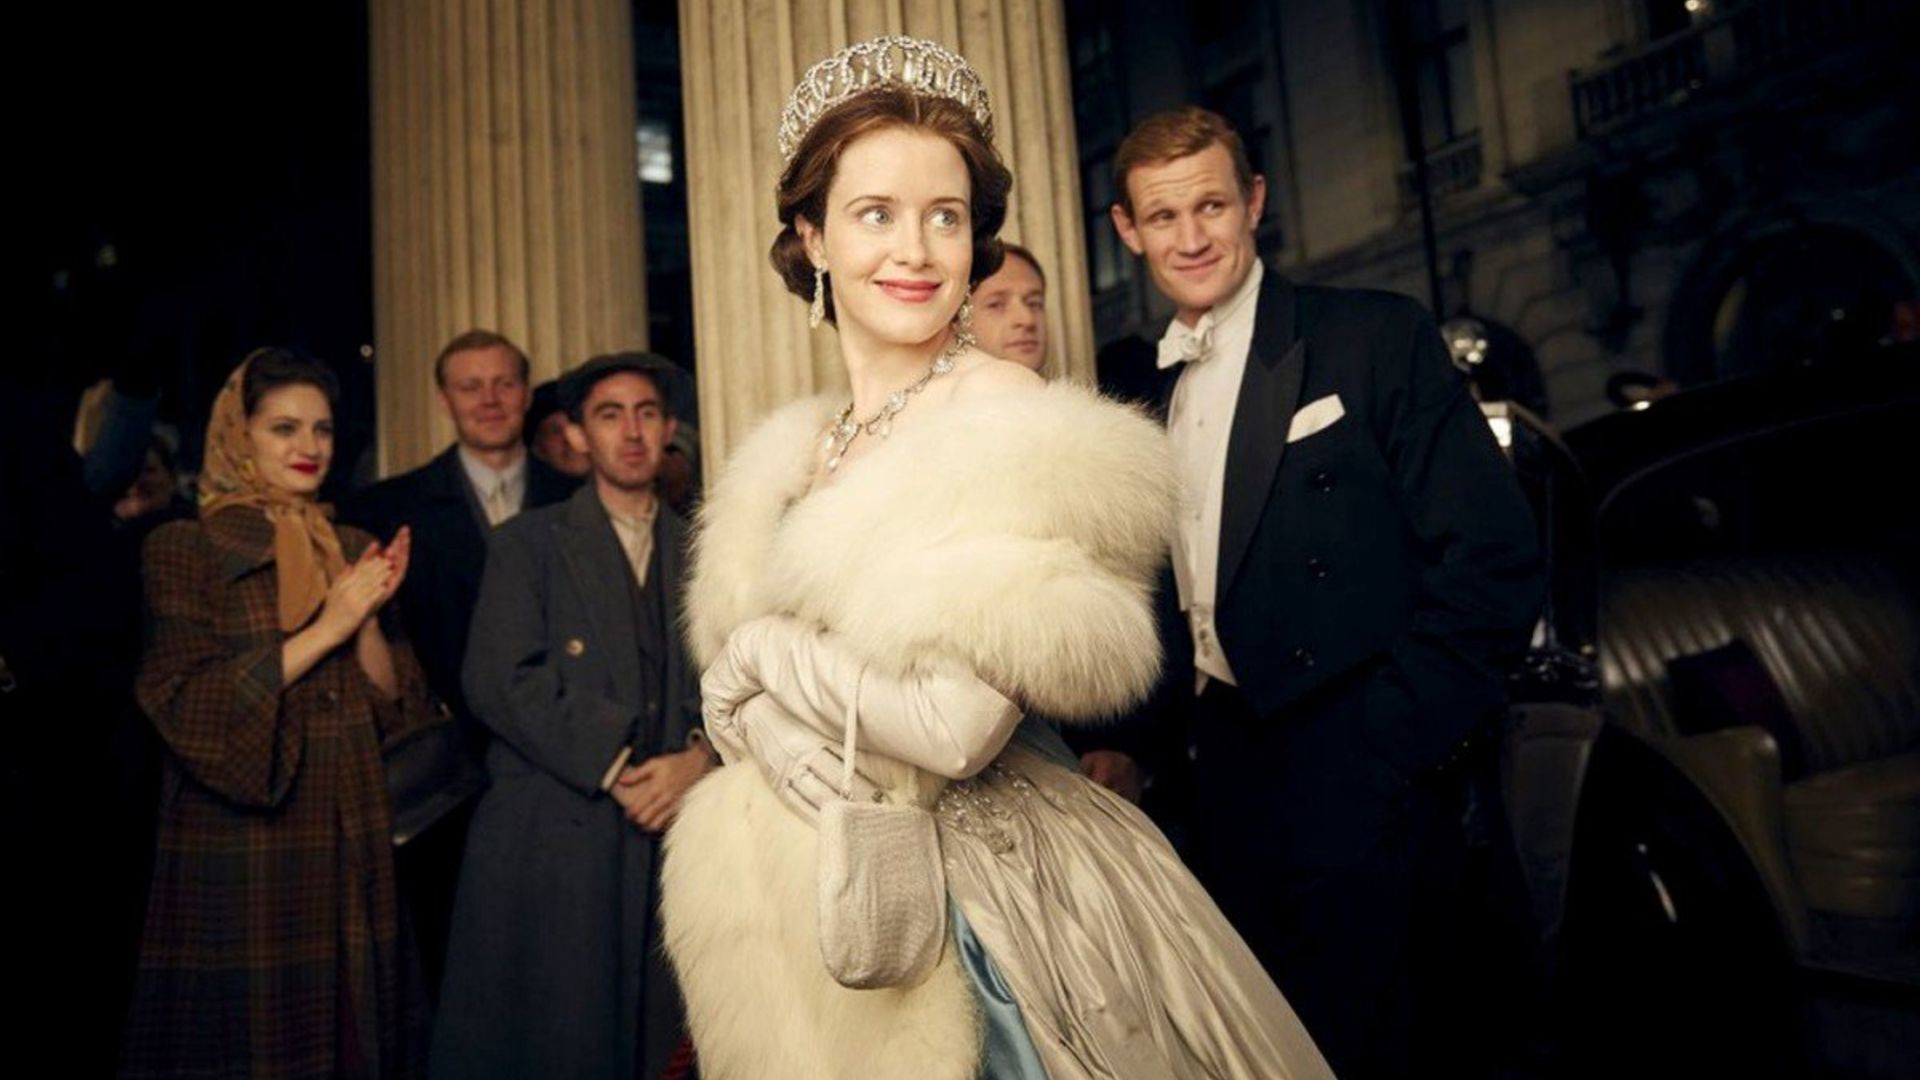 The Crown – one of the best Netflix shows you can watch right now